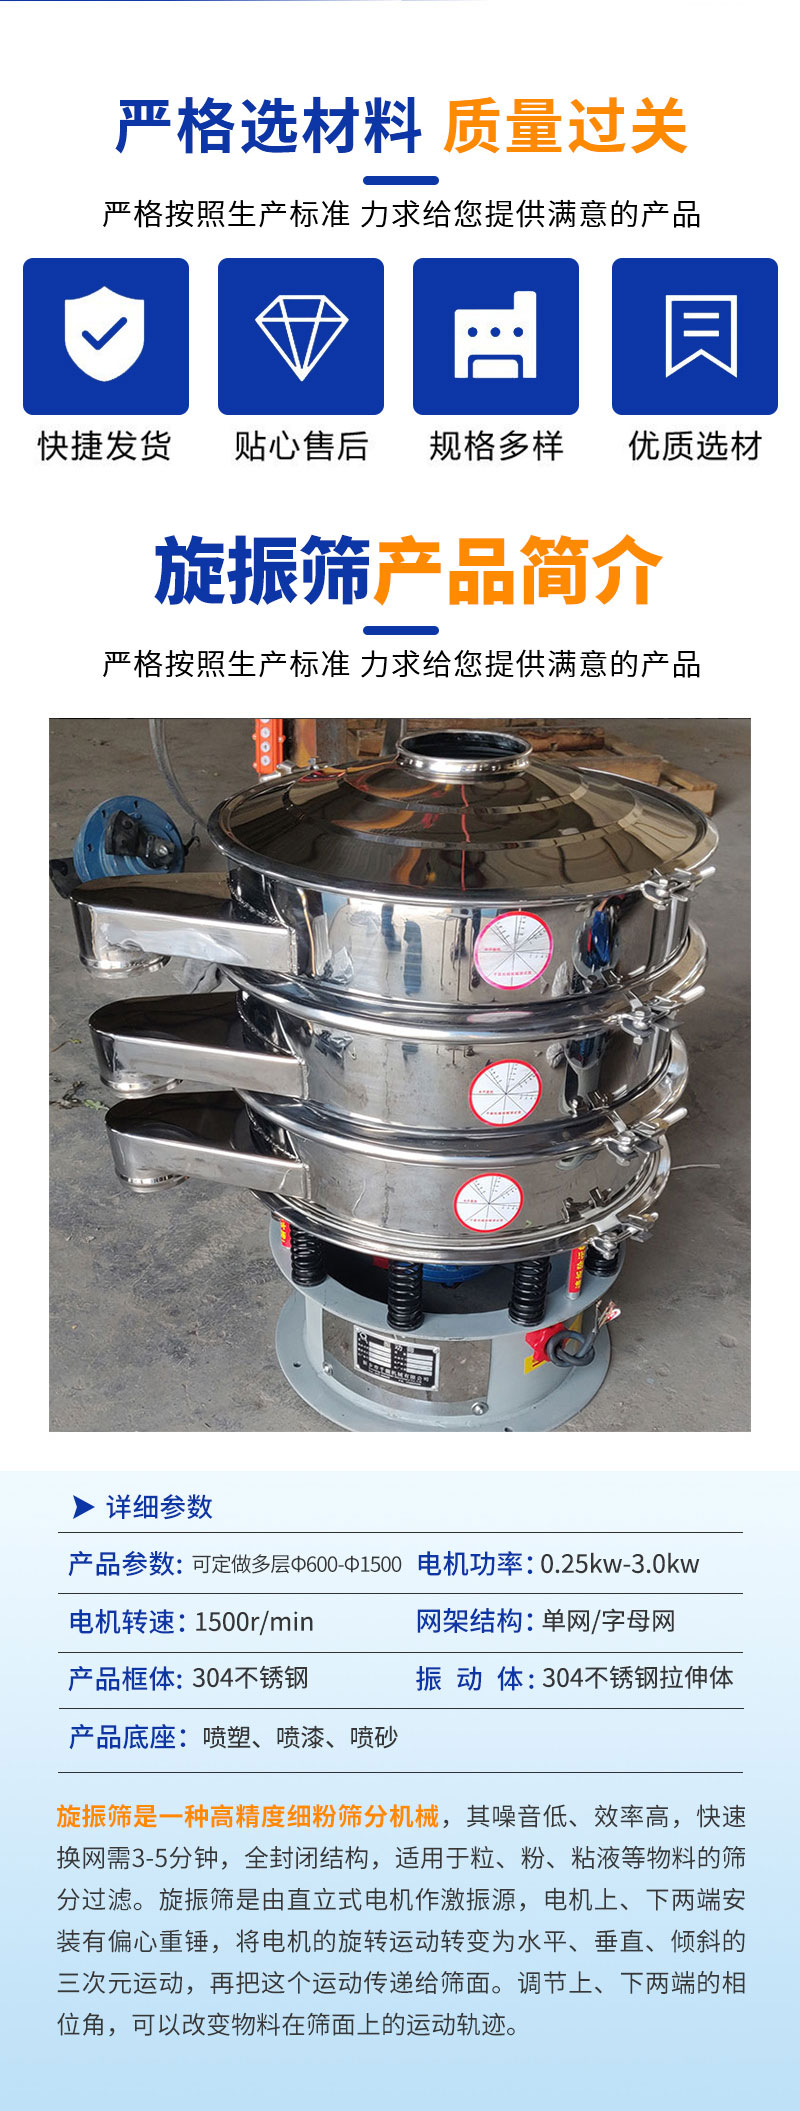 Automatic rice vibrating screen separator assembly line intelligent screening and separation machine customization unmanned electric screen customization